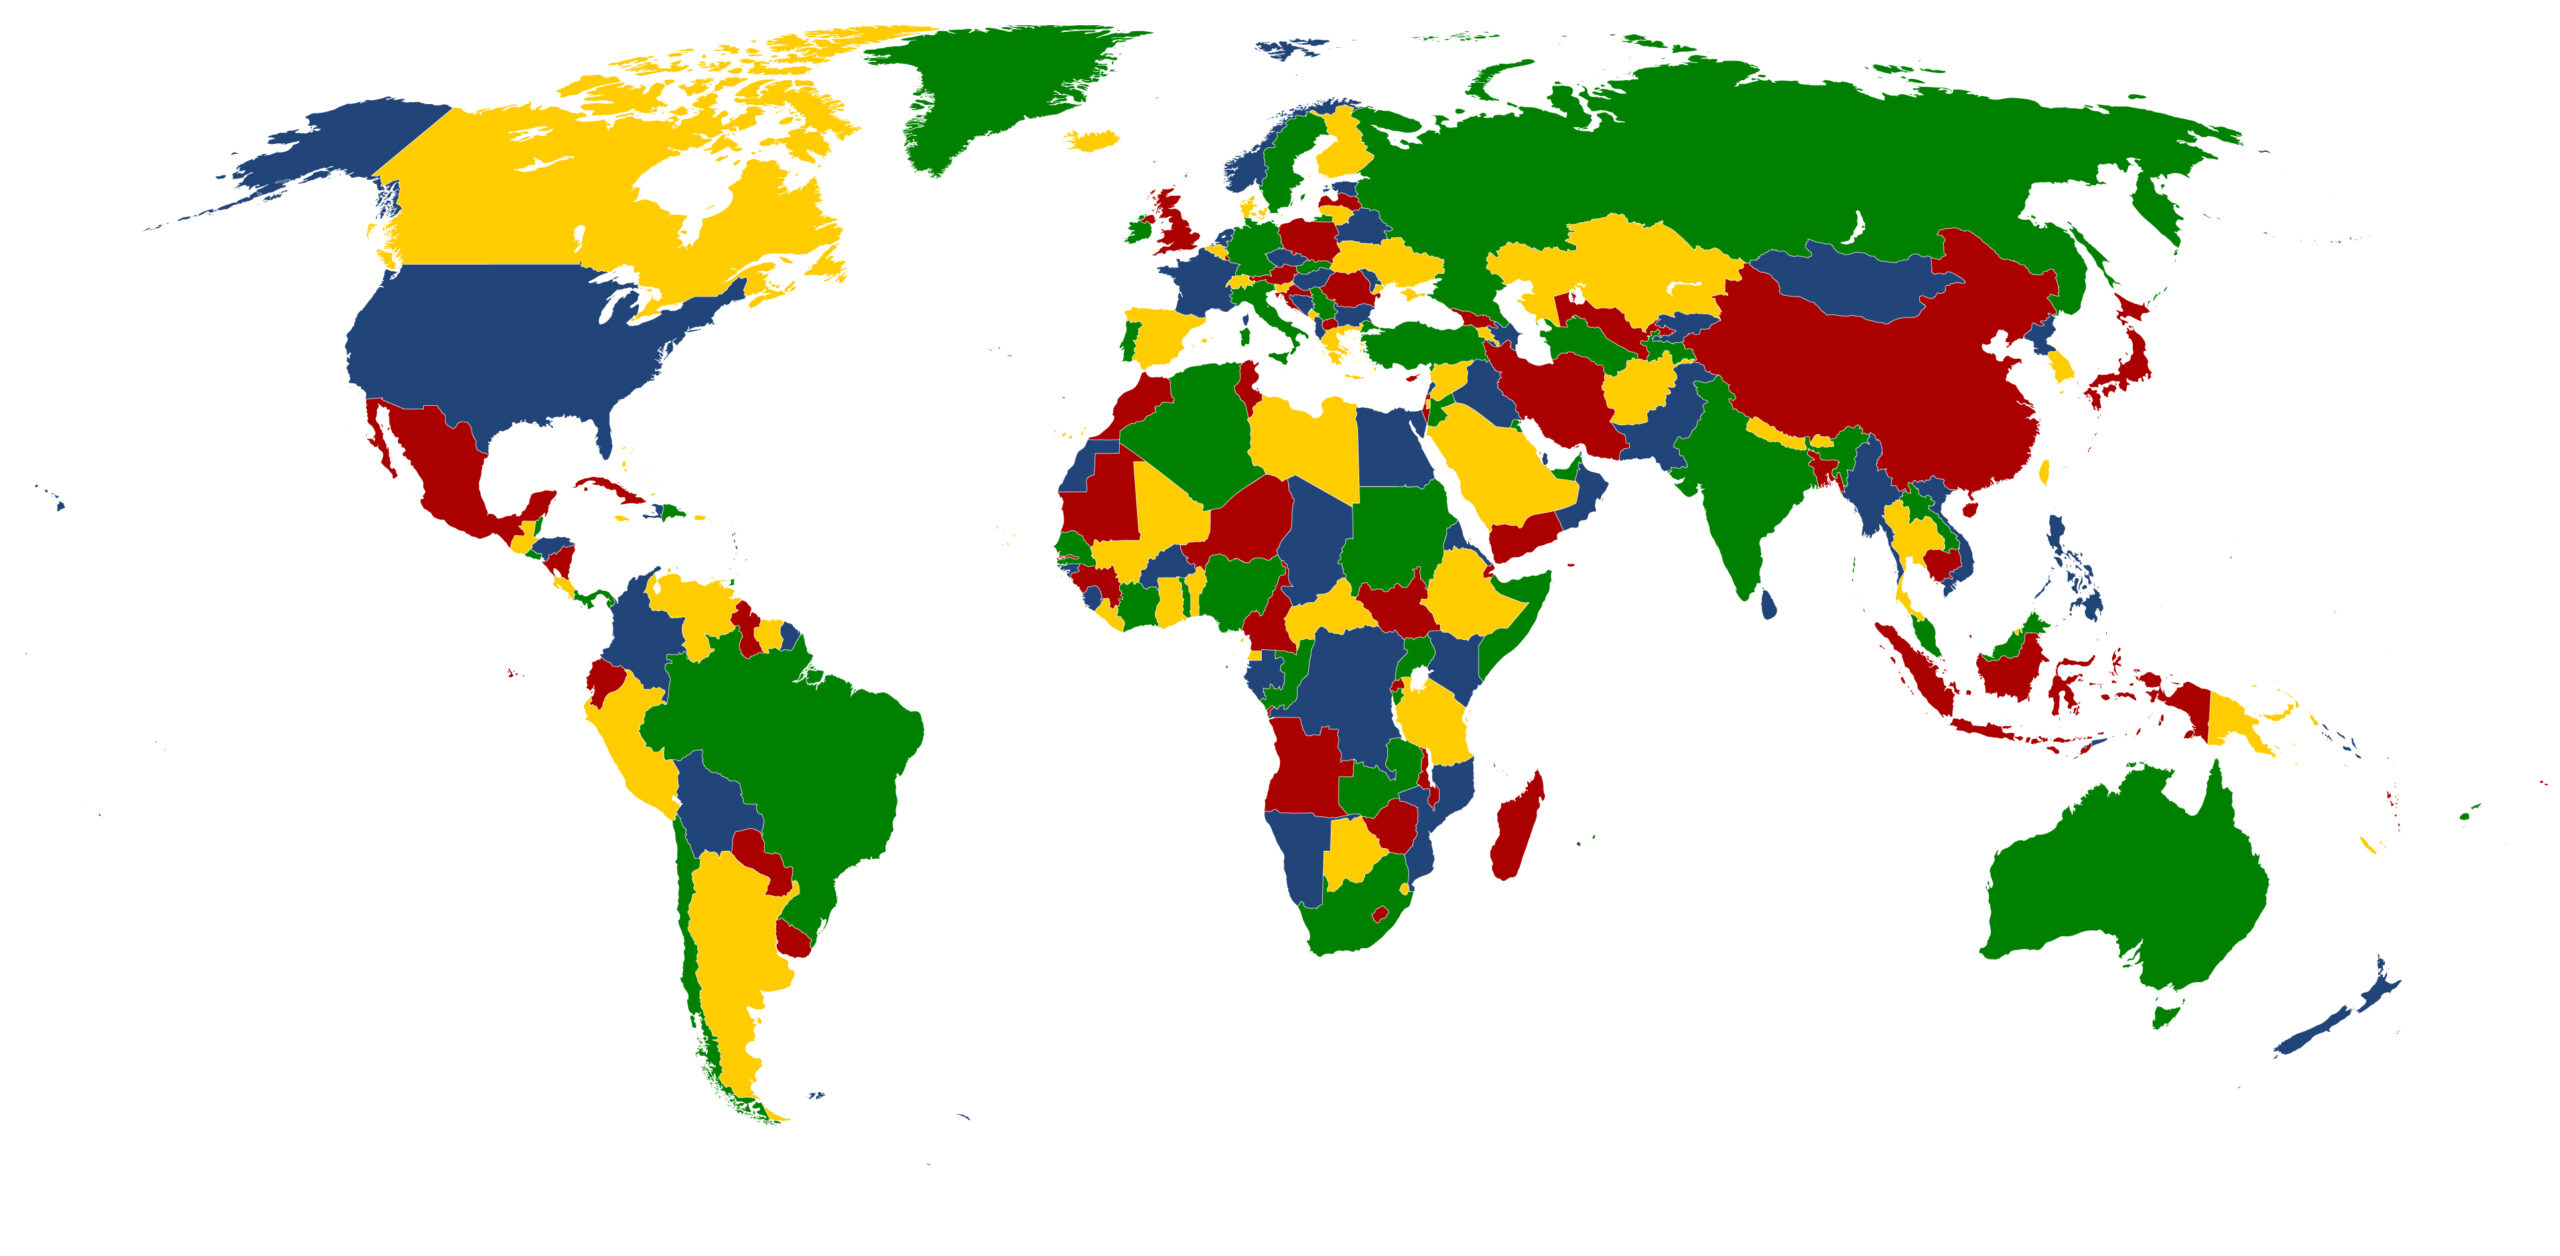 a world map made with four colors - each country is given a different color, and no two colors touch.